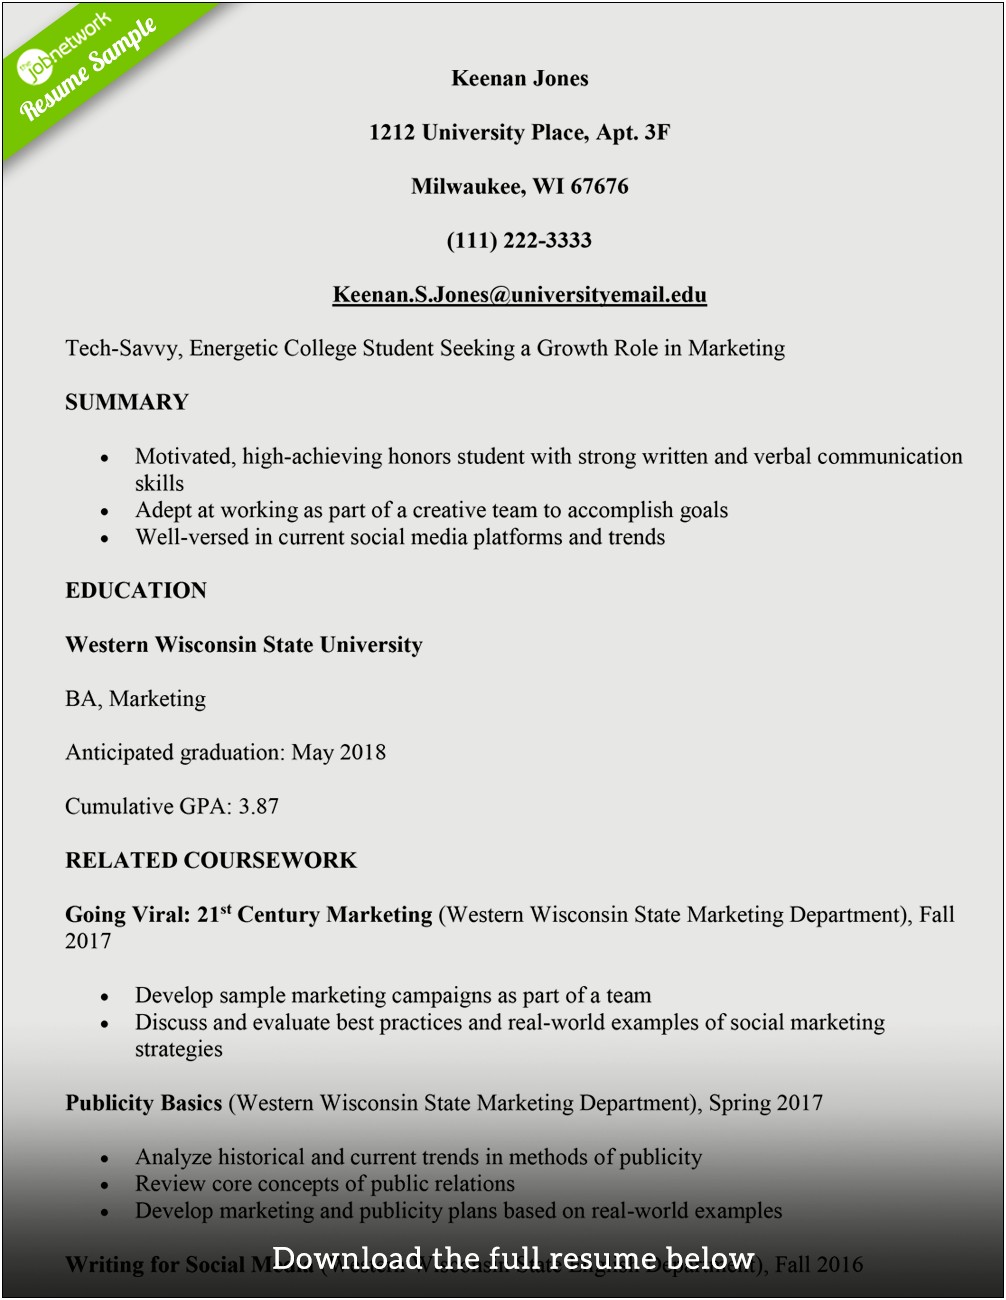 Best Resume For Campus Interview